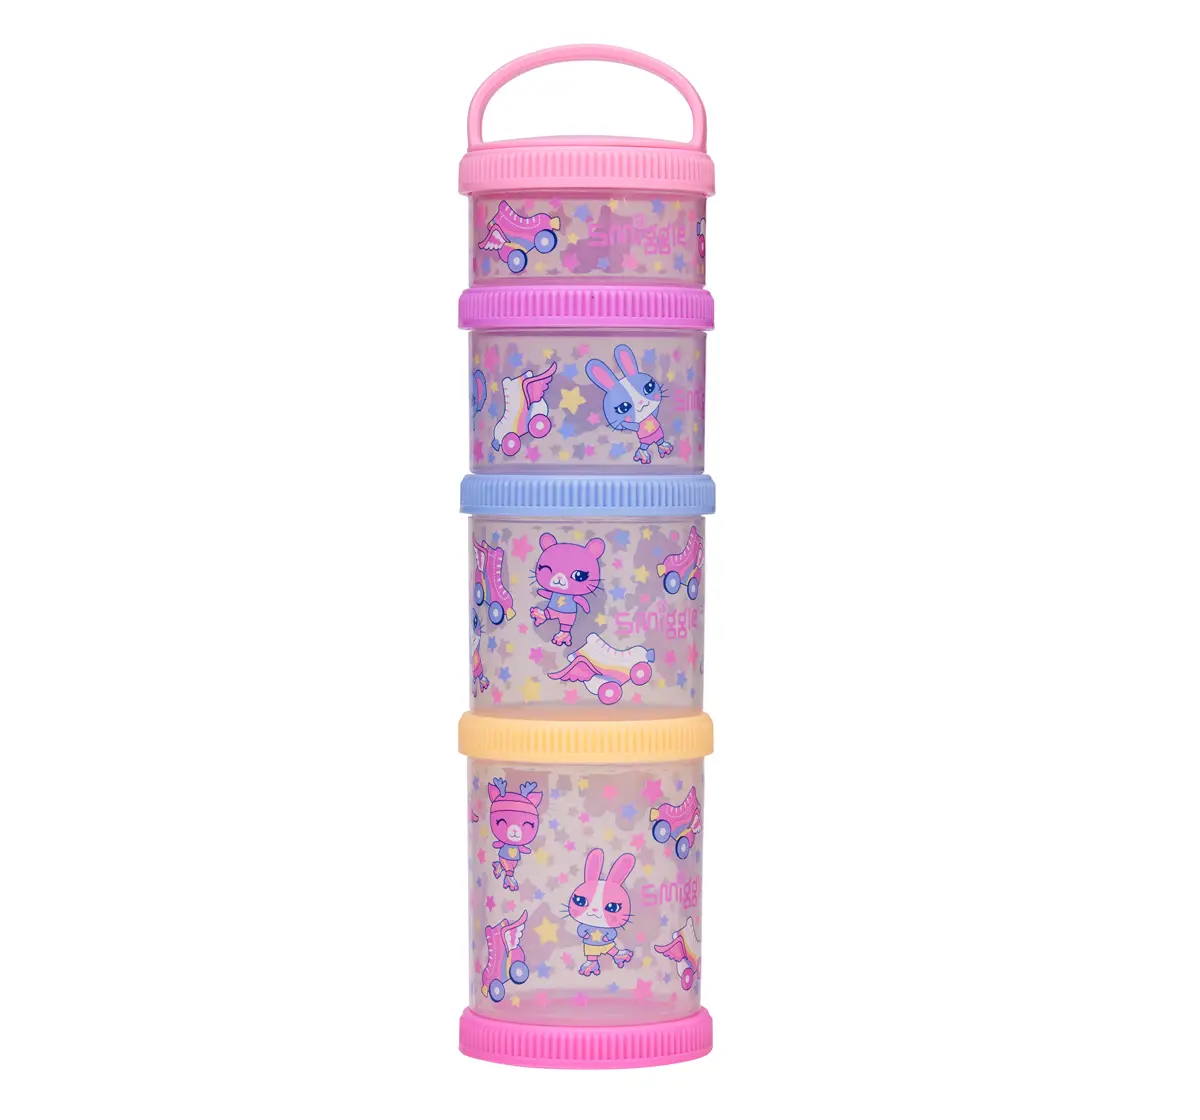 Smiggle Movin' Stackable Containers set of 4, Pink, 3Y+